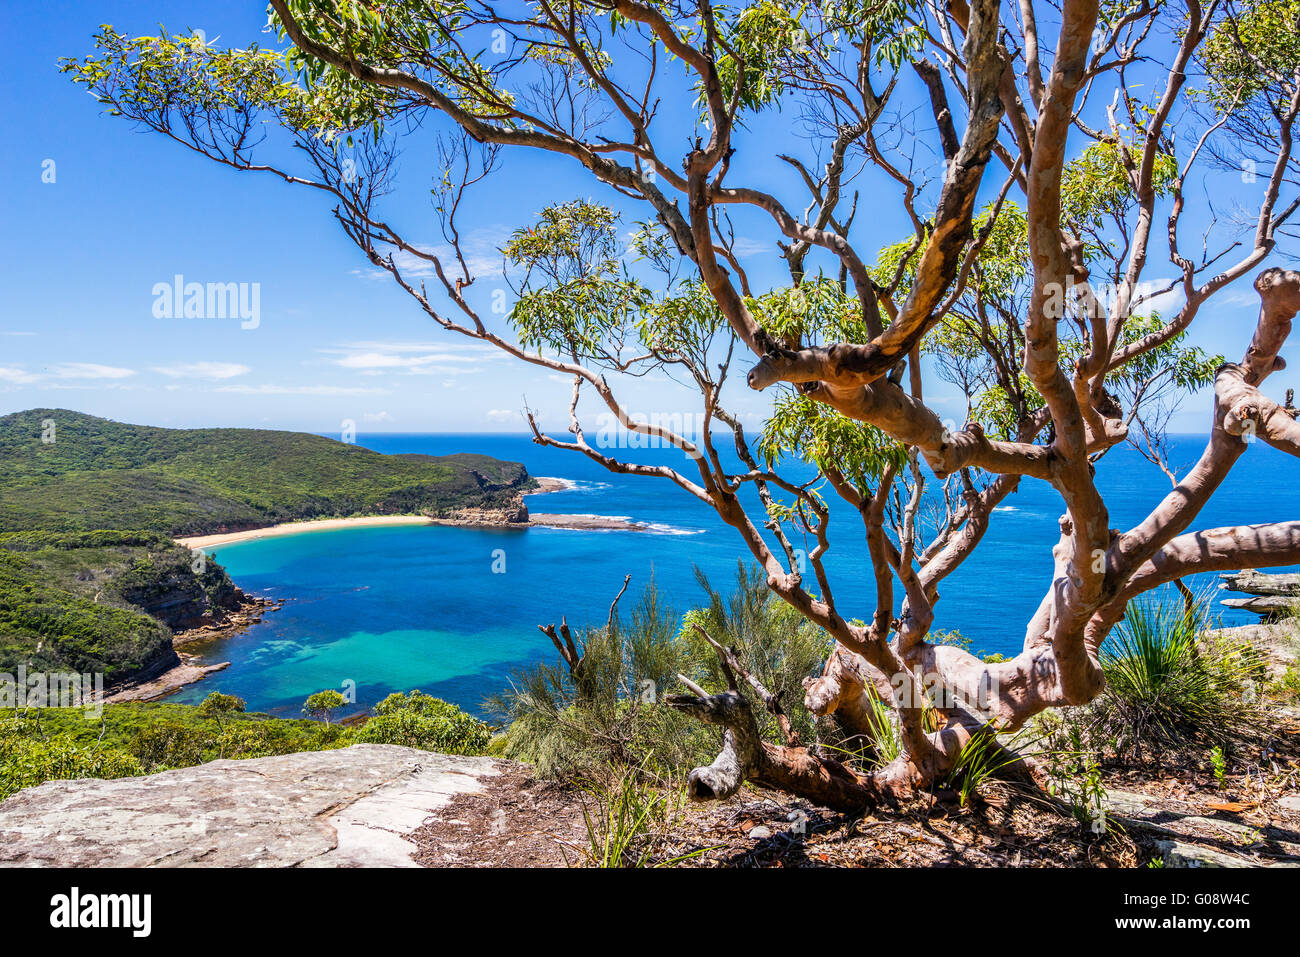 Australia, New South Wales, Central Coast, Bouddi National Park, view of Maitland Bay and Bouddi Point from Bullimah Lookout Stock Photo